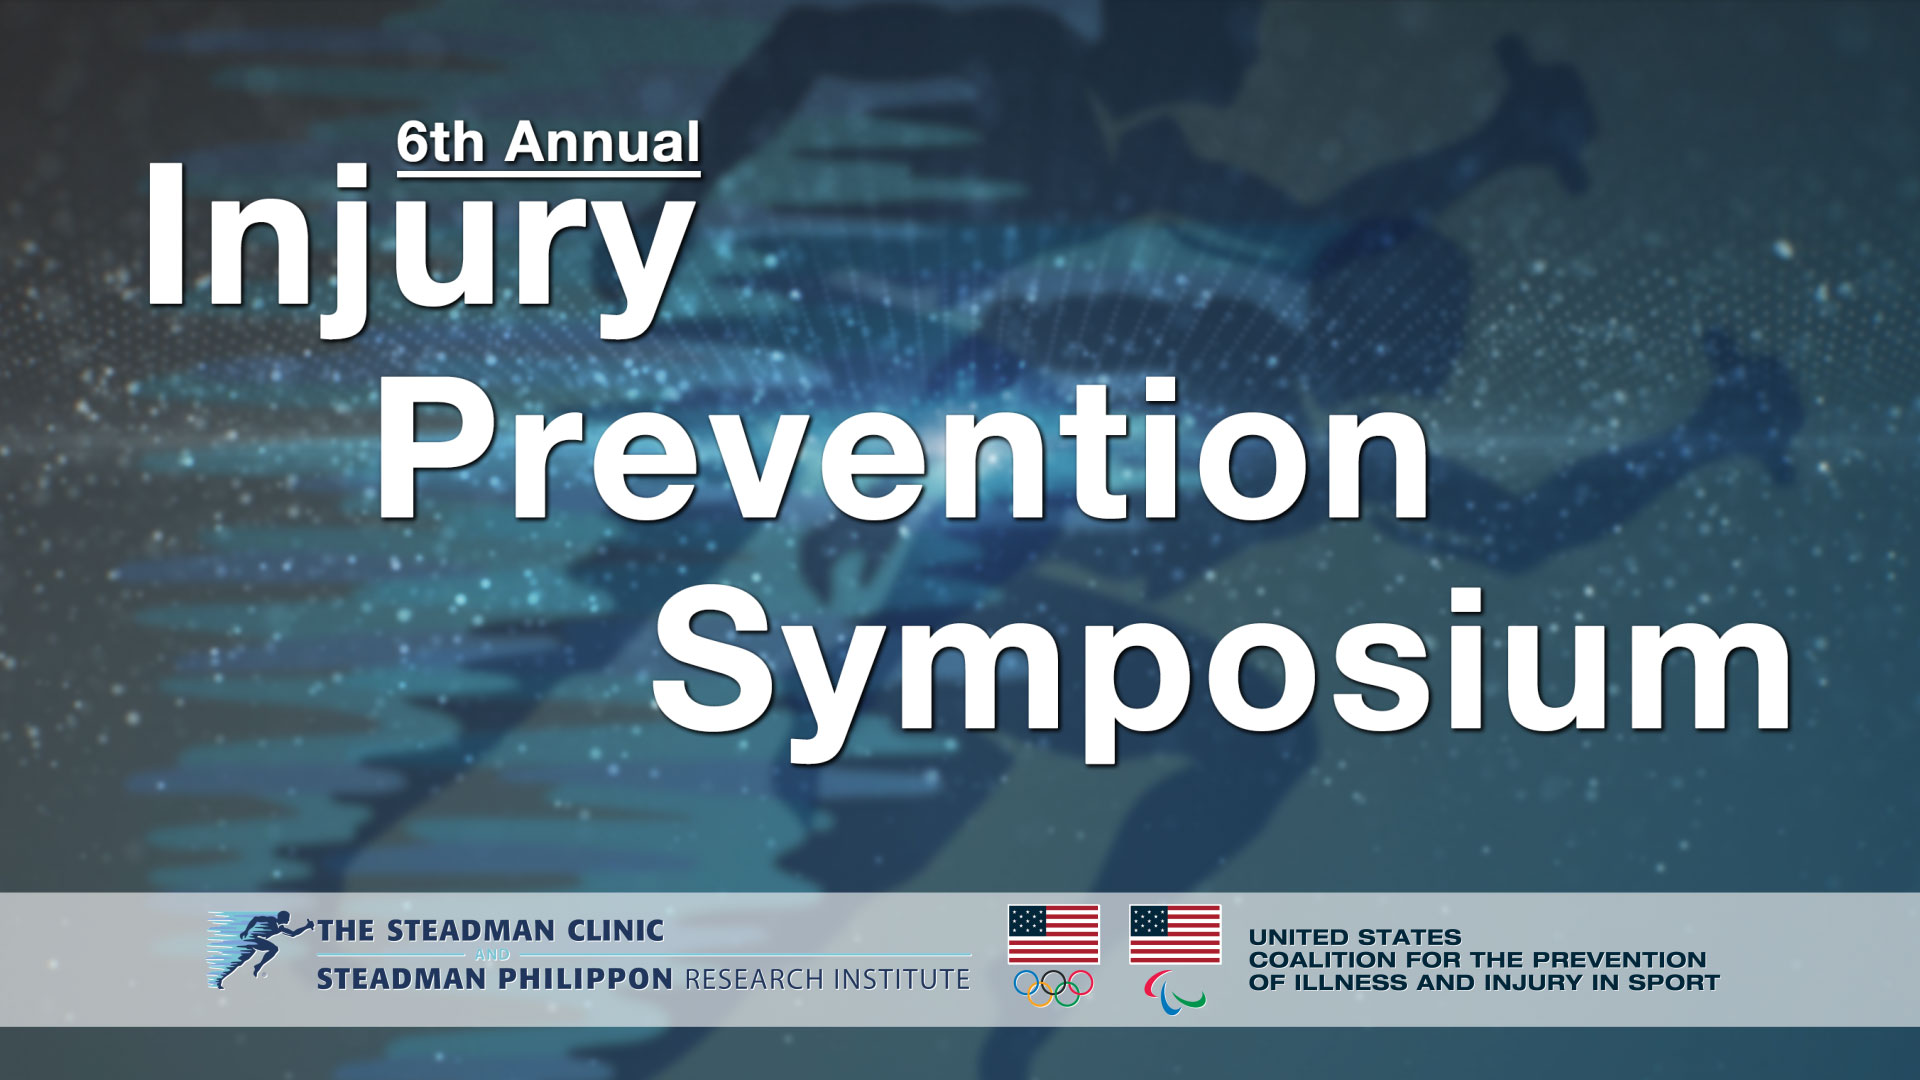 Steadman Philippon Research Institute and U.S. Olympic & Paralympic Committee to conduct sixth annual Injury Prevention Symposium April 27-28